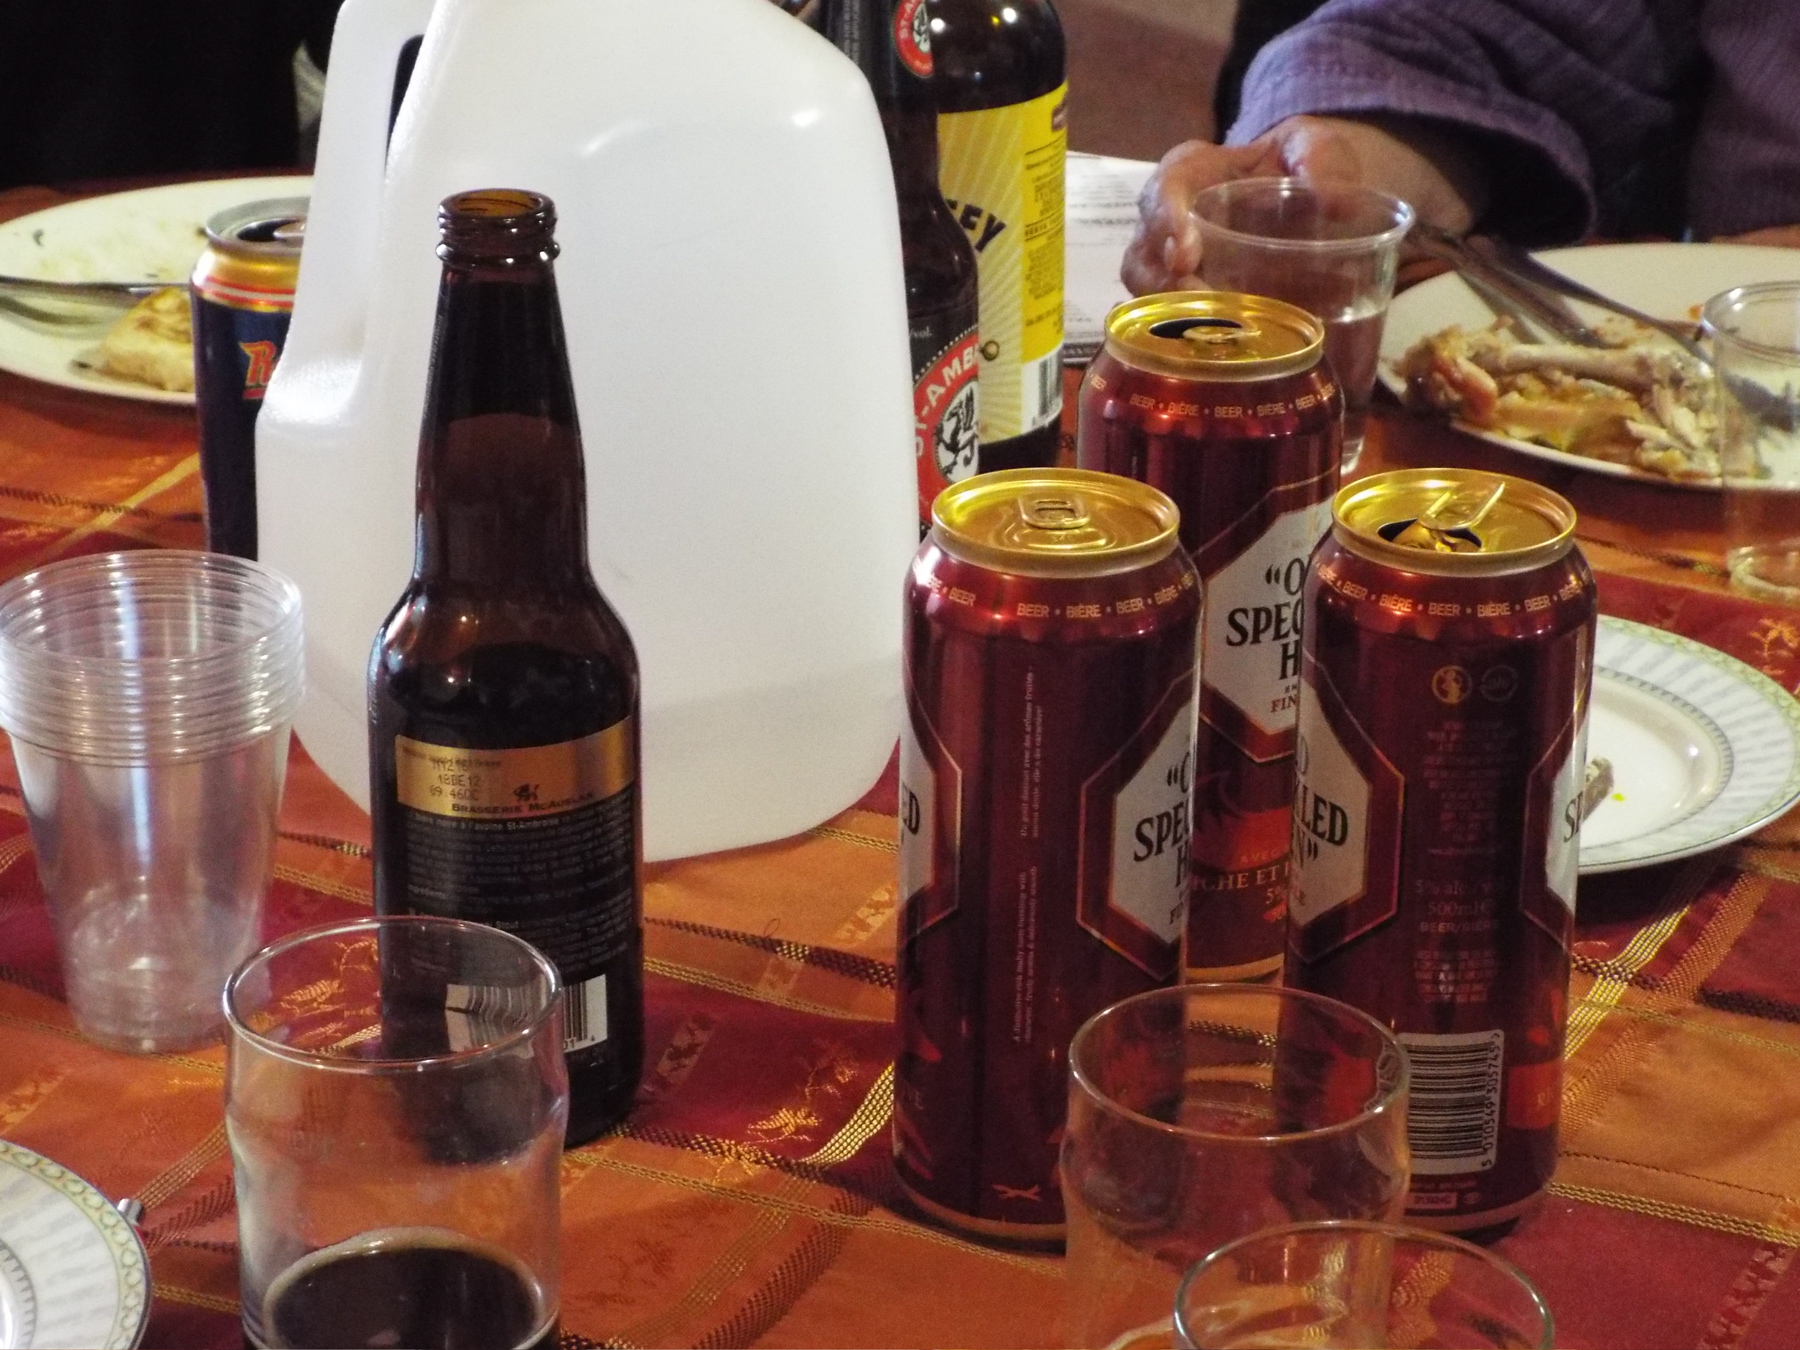 Our late afternoon beer-tasting session carried over into dinner.